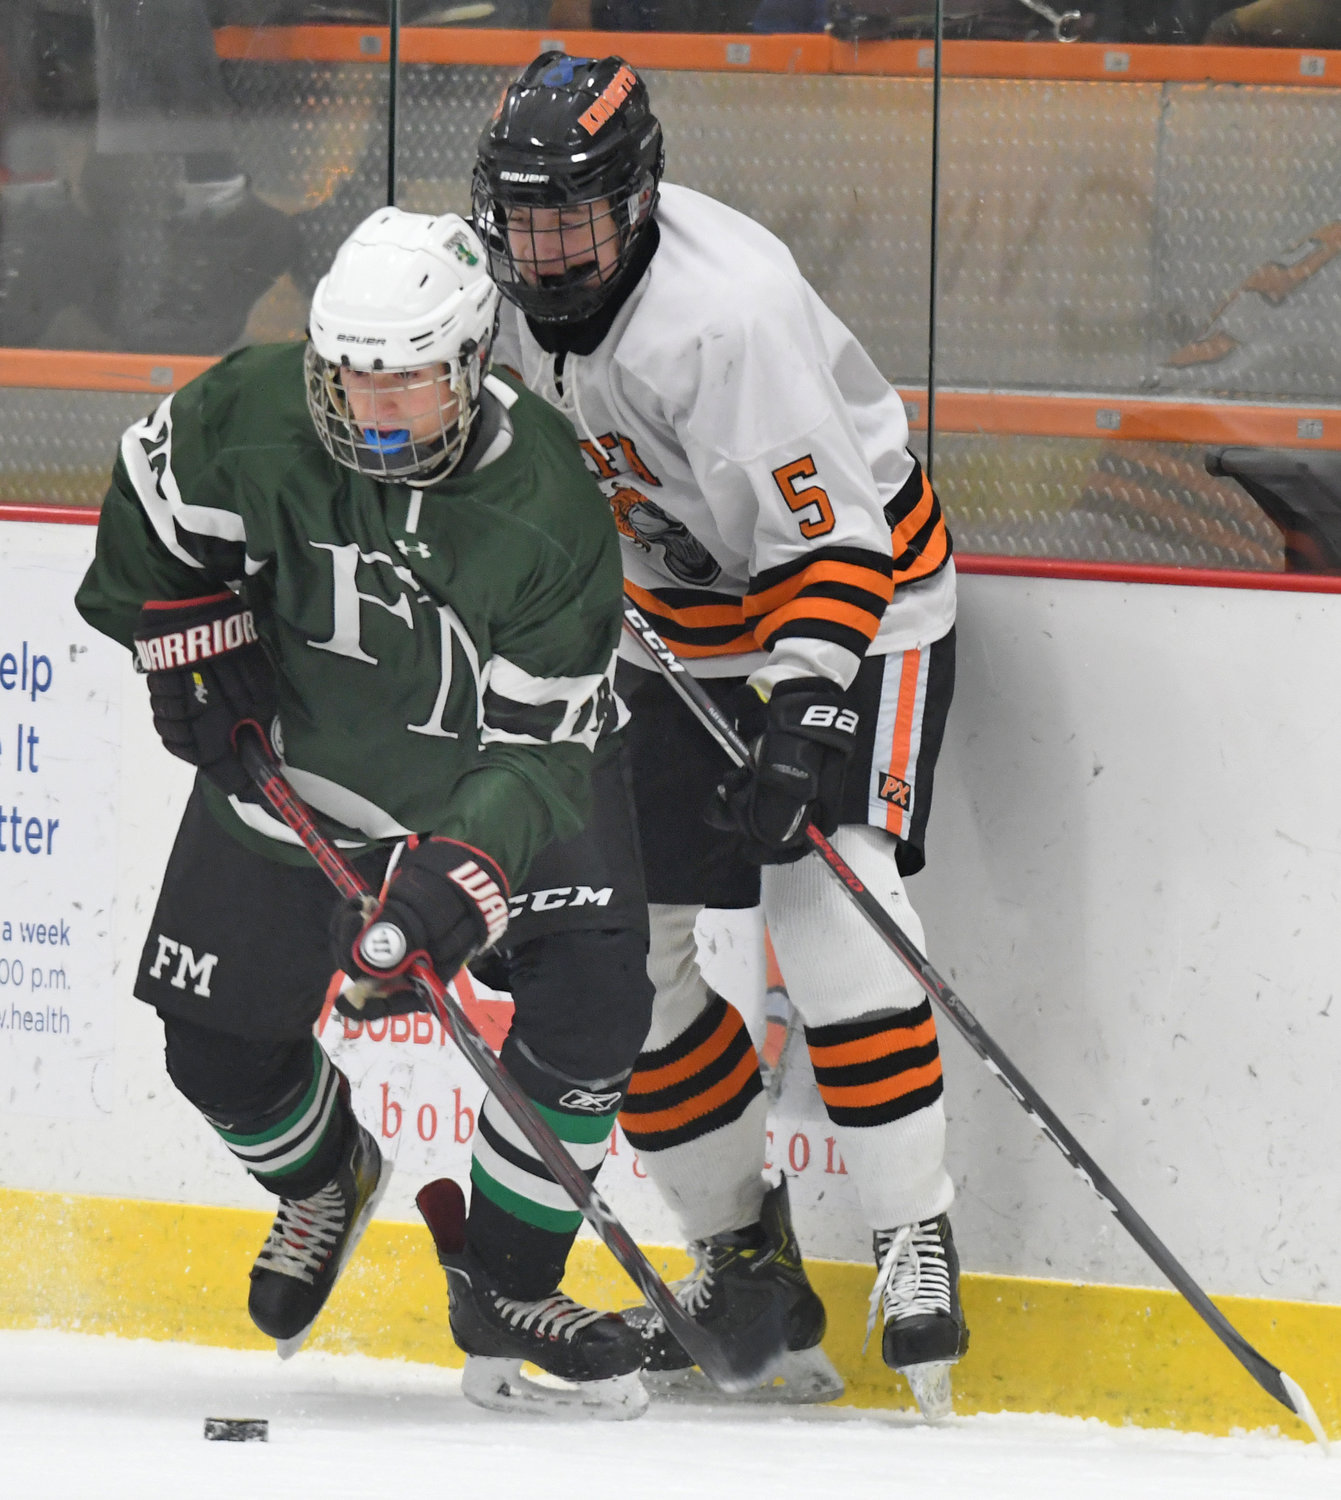 LOOKING TO CONTROL THE PUCK — Joey Gulla of RFA, right, battles with F-M’s Colin Debejian along the boards in the first period of Tuesday’s game at Kennedy Arena. The Hornets beat the Black Knights, 2-1.